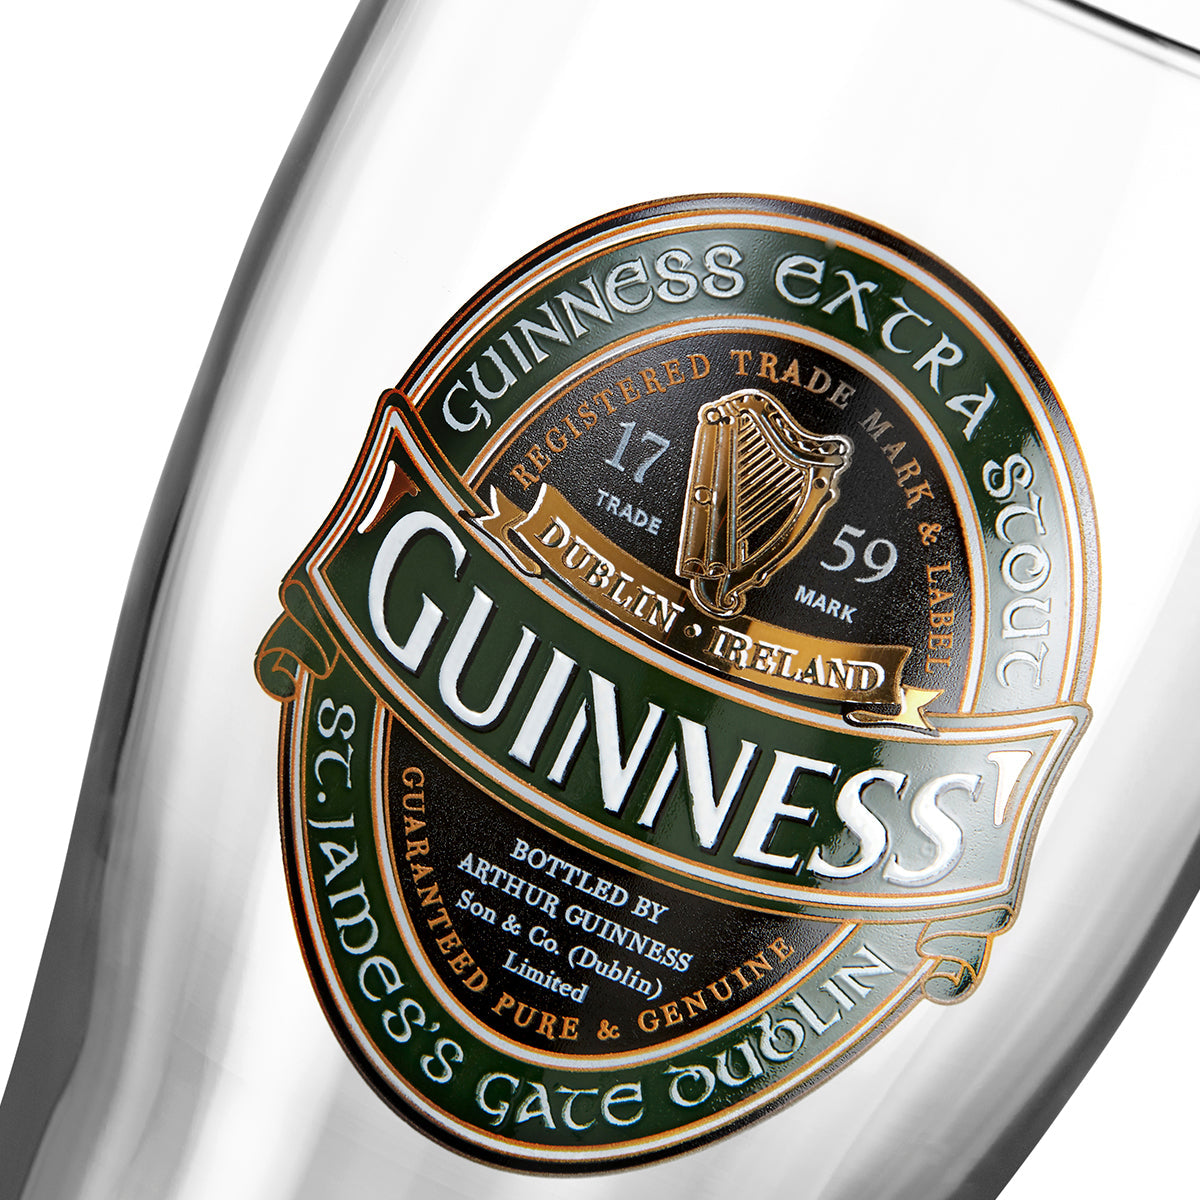 An Guinness Ireland Collection Pint Glass - 6 Pack on a white background.